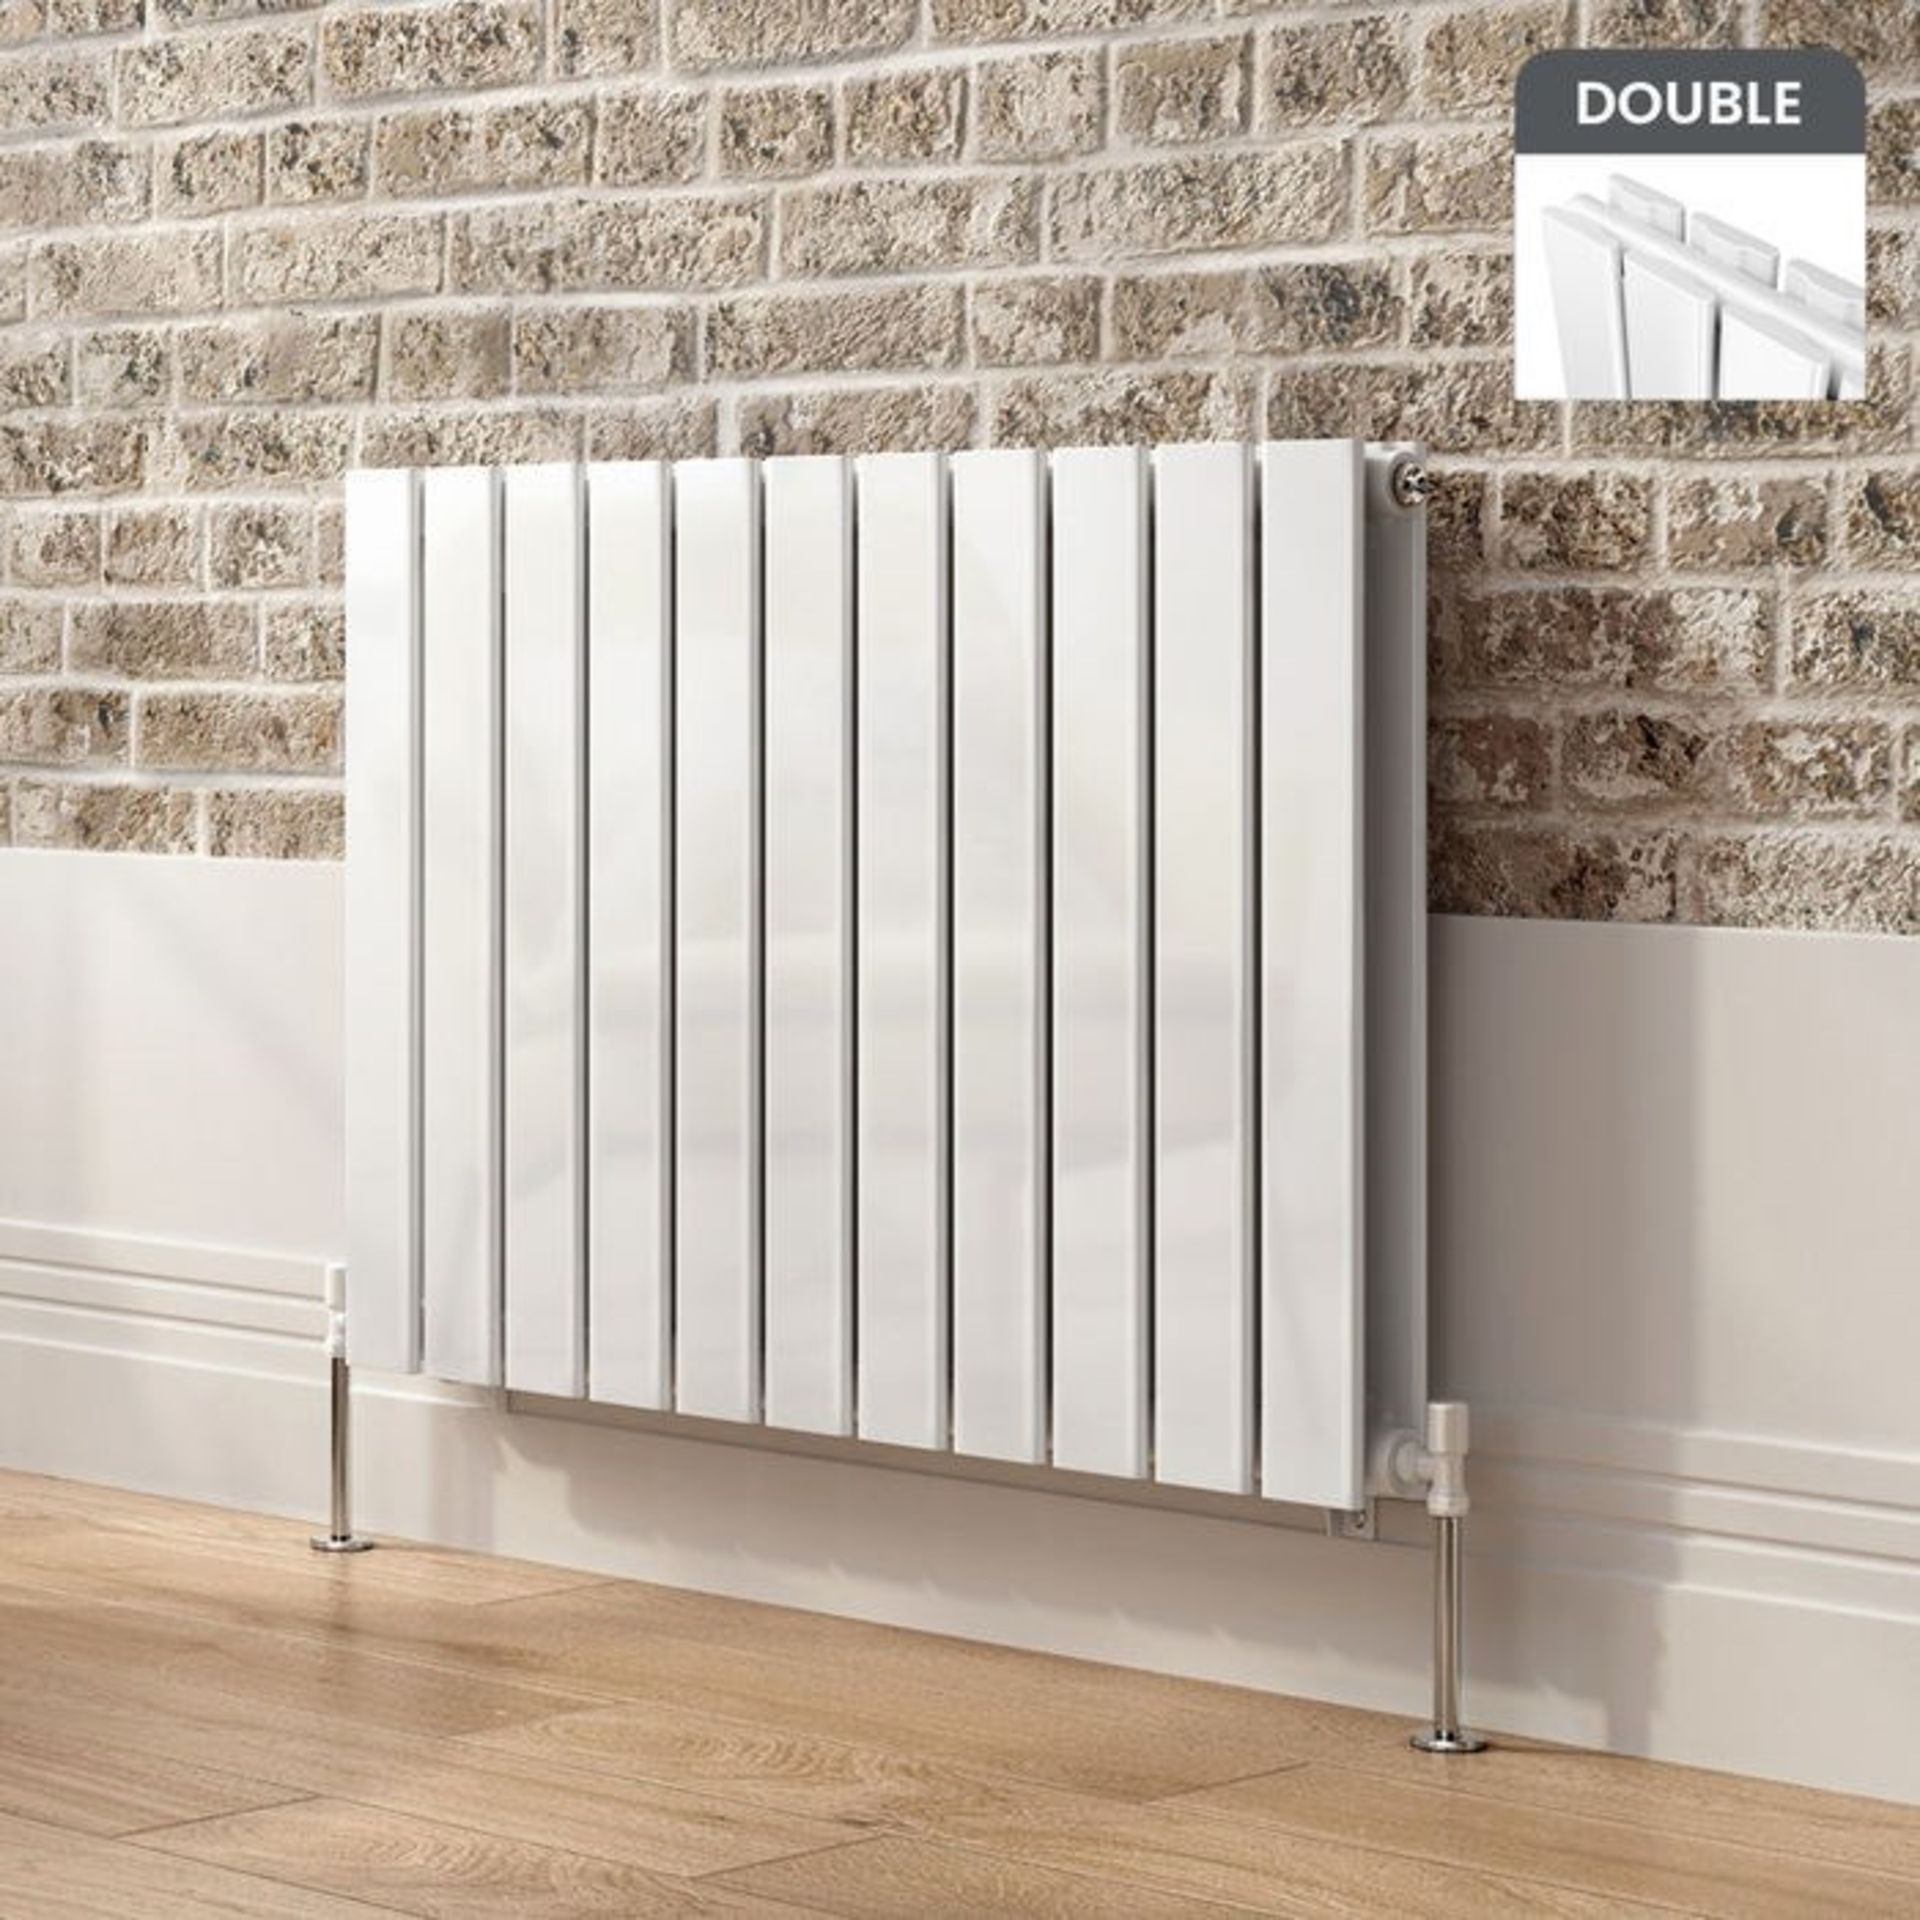 600x830mm Gloss White Double Flat Panel Horizontal Radiator. RRP £474.99.RC221.Made with high... - Image 2 of 2